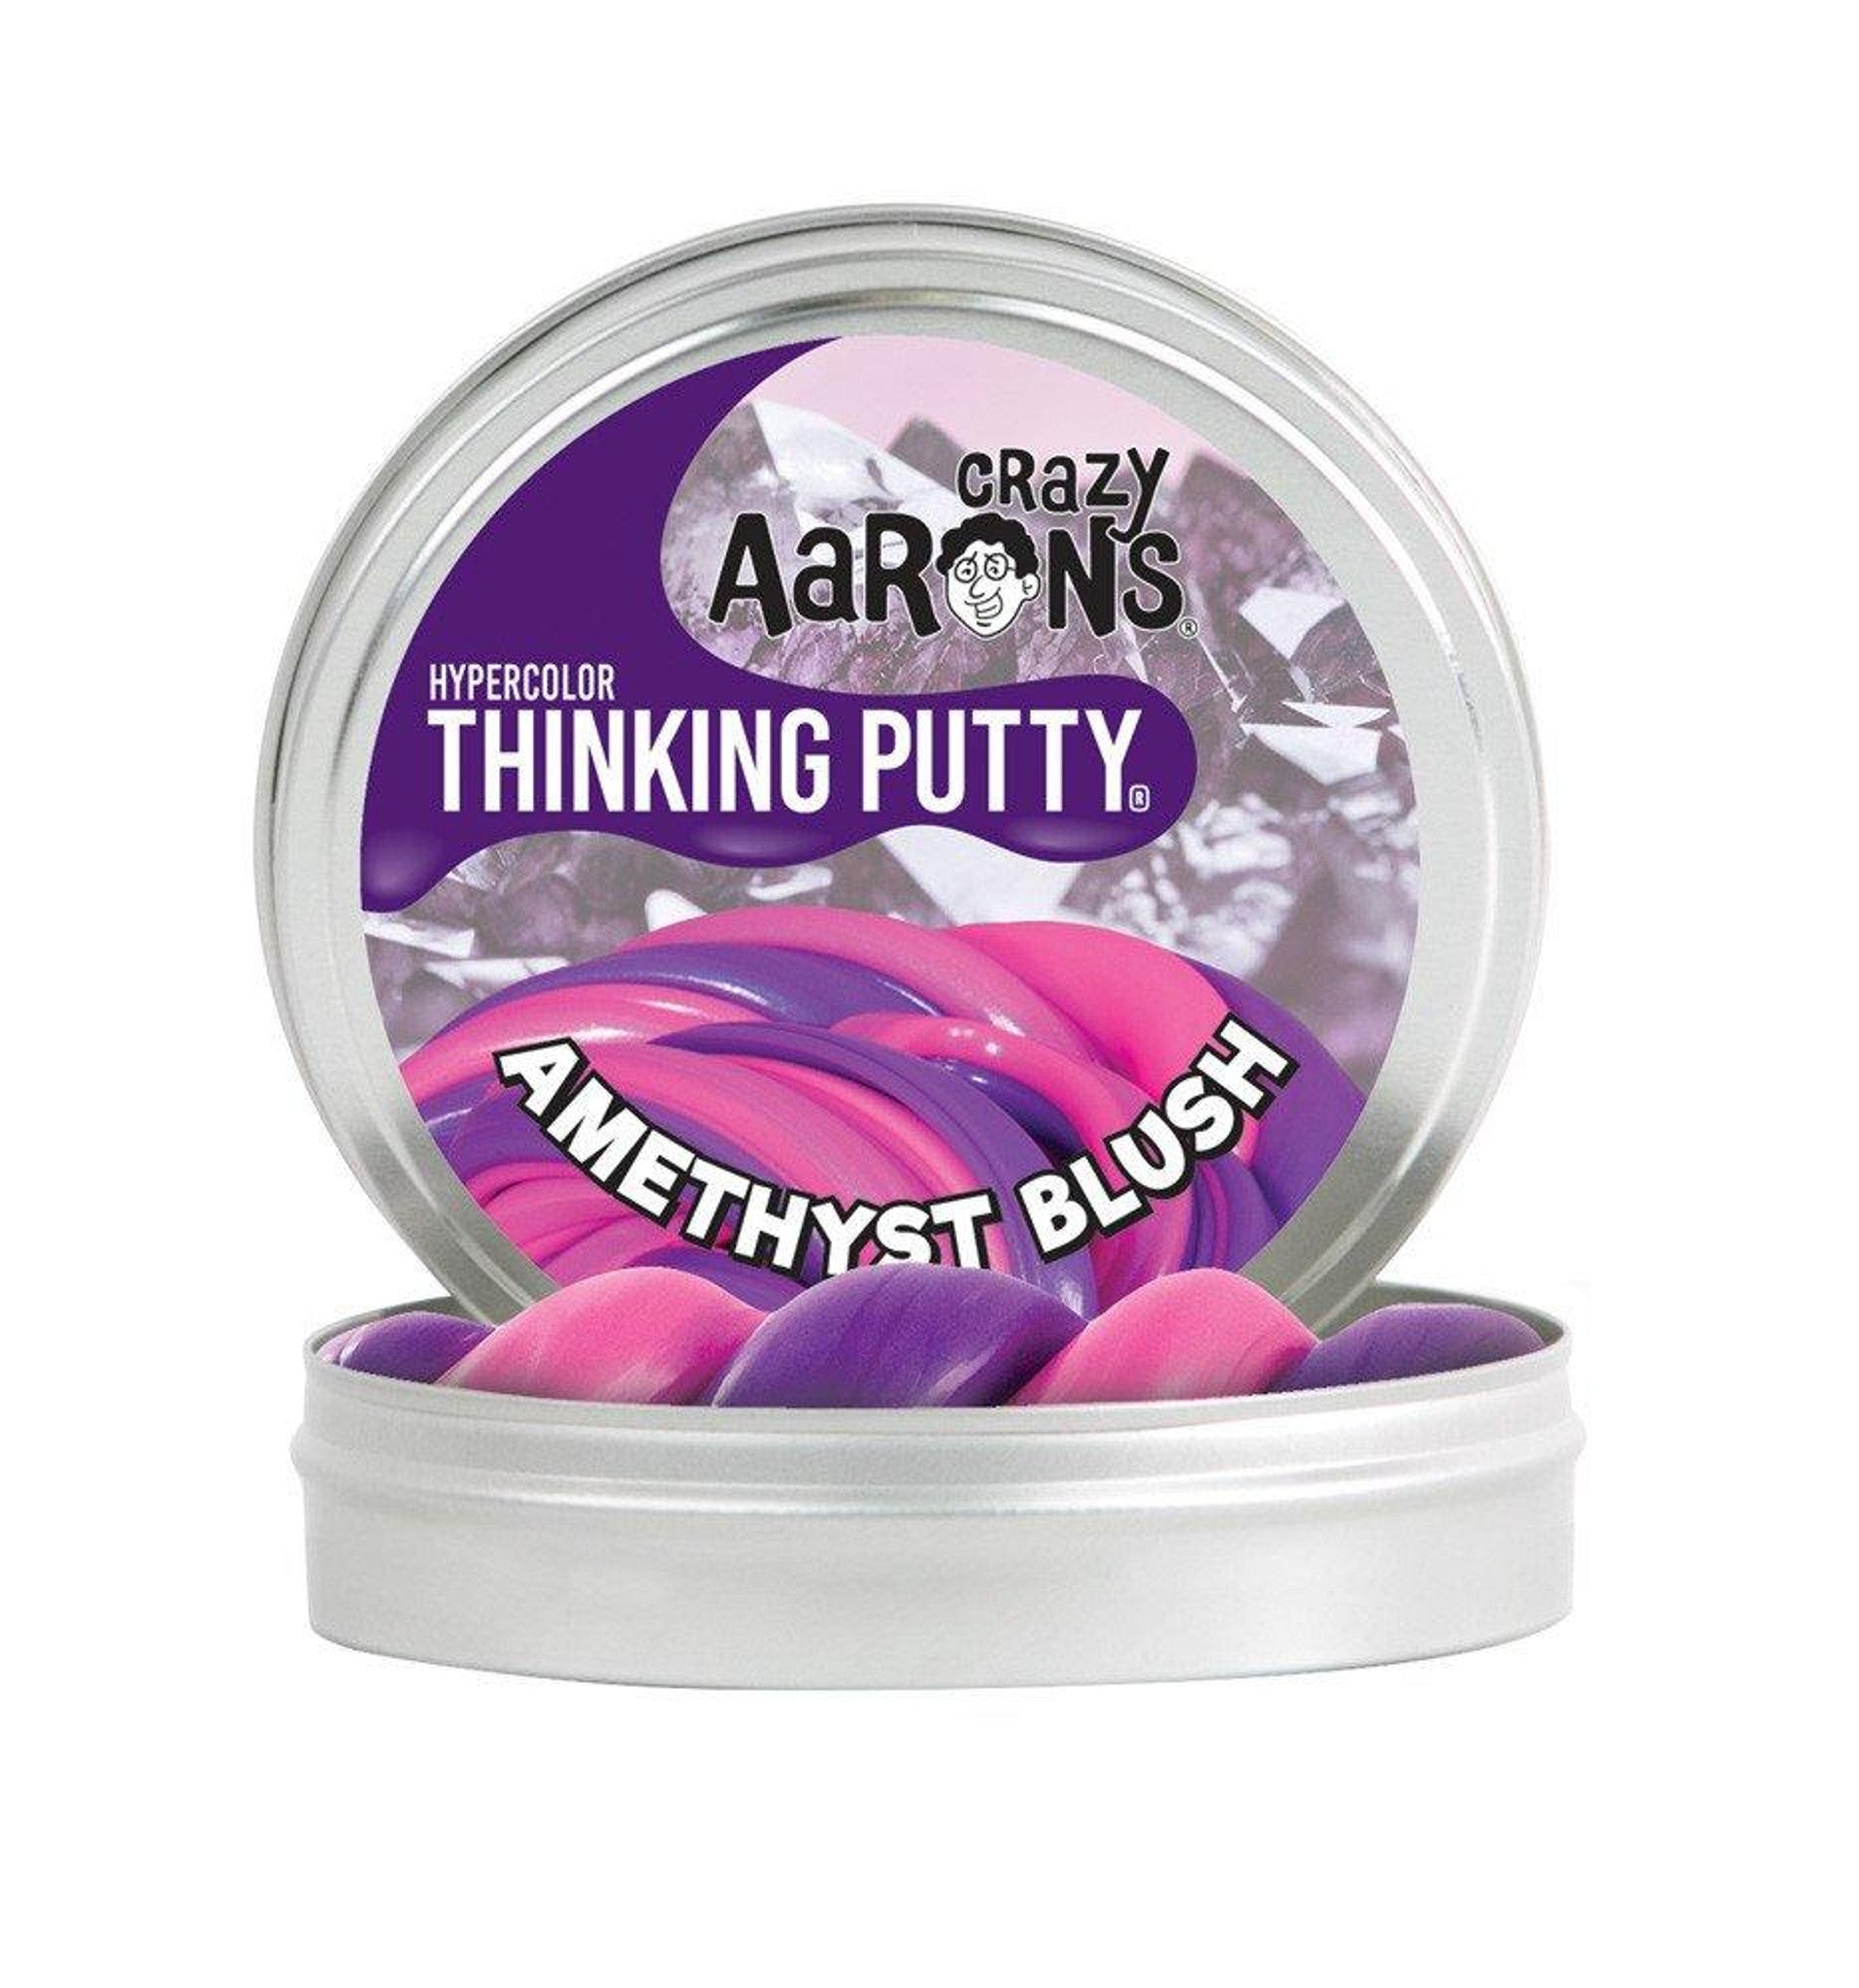 Crazy Aarons Hypercolor Putty Amethyst Blush